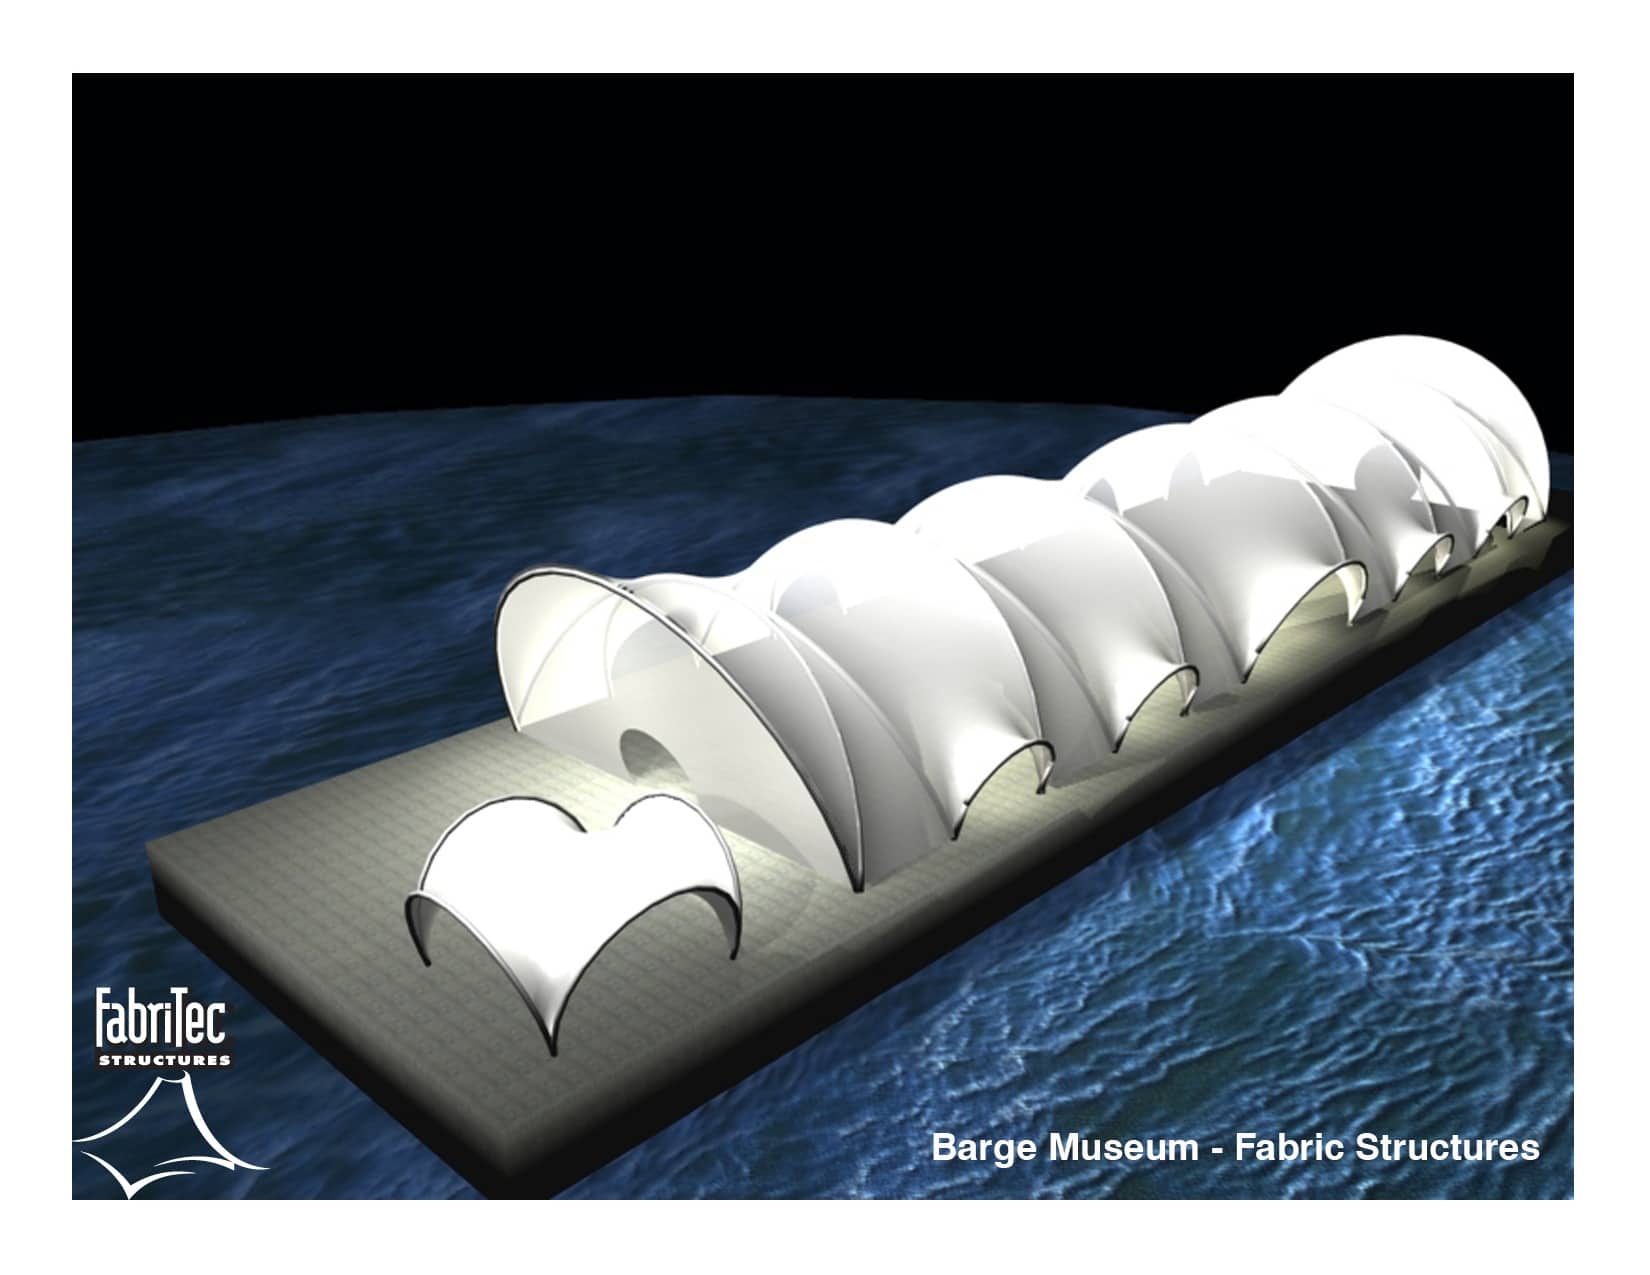 Barge Museum Structure FabriTec SketchUp